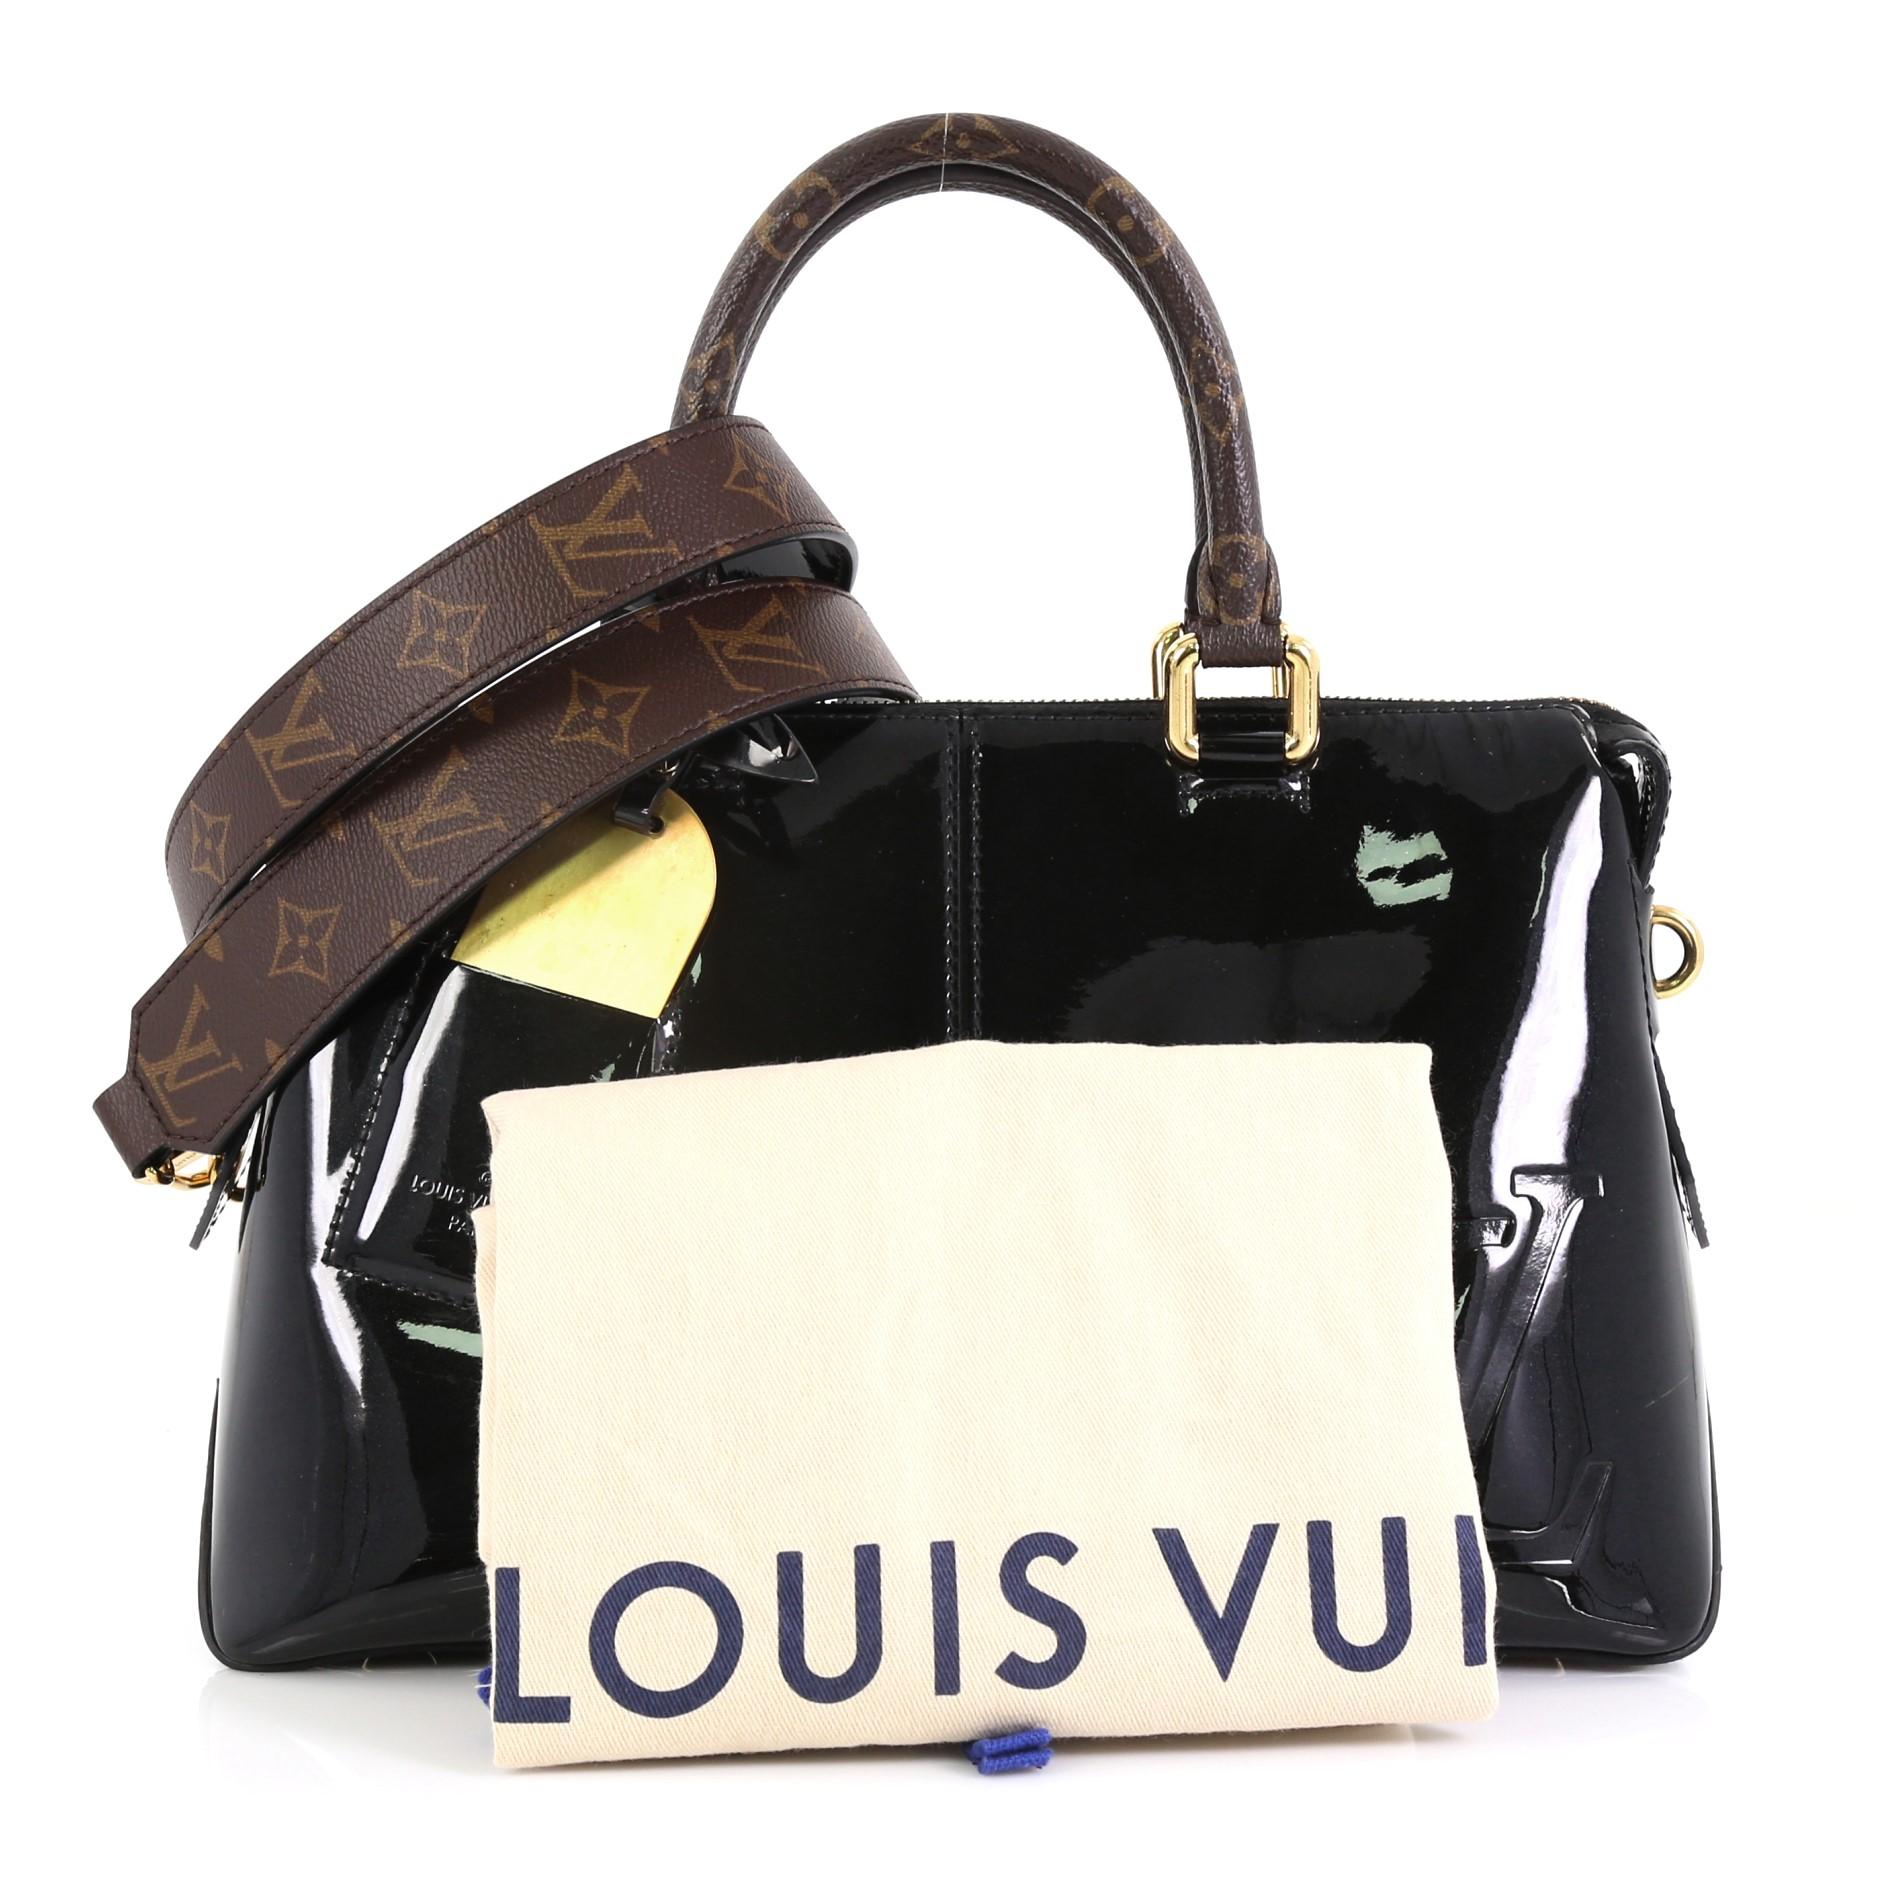 This Louis Vuitton Miroir Handbag Vernis with Monogram Canvas, crafted in black monogram vernis, features dual rolled monogram handles and gold-tone hardware. Its zip closure opens to a black fabric and brown monogram coated canvas interior with